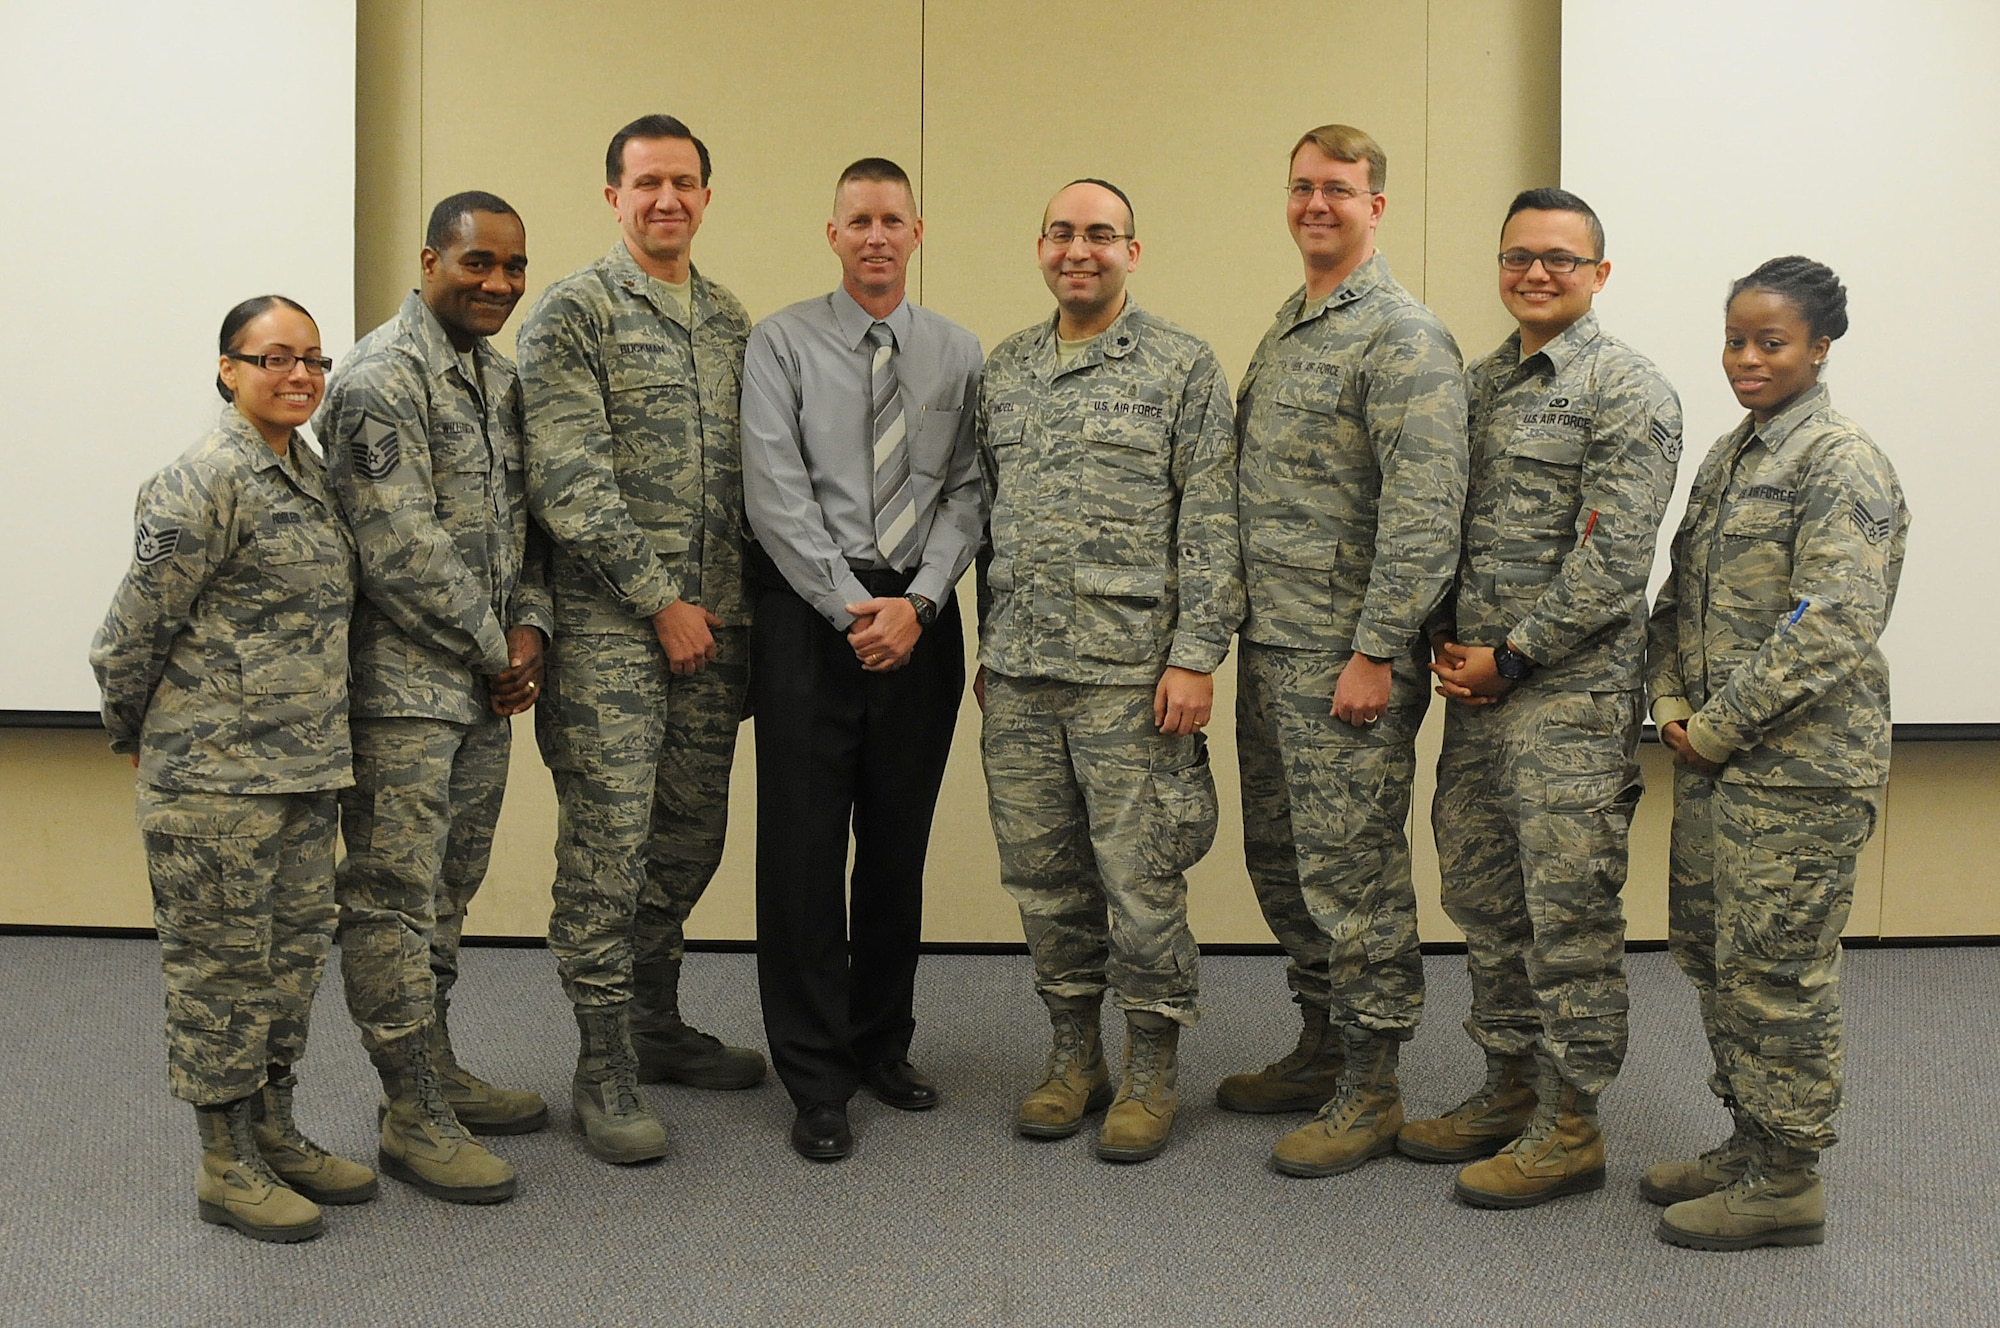 Airmen from the 108th Wing chaplain office pose for a picture at the end of the Traumatic Event Management Course Jan. 16, 2015, at Joint Base McGuire-Dix-Lakehurst, N.J. The Army's TEM course was a week long and focused on unit cohesion and effectiveness to help manage crisis situations. The course used group activities and role playing to reinforce the lessons. At the end of the week, the students are able to take what they learned and bring it back to their units. (U.S. Air National Guard Photo by Airman 1st Class Julia Pyun/Released)